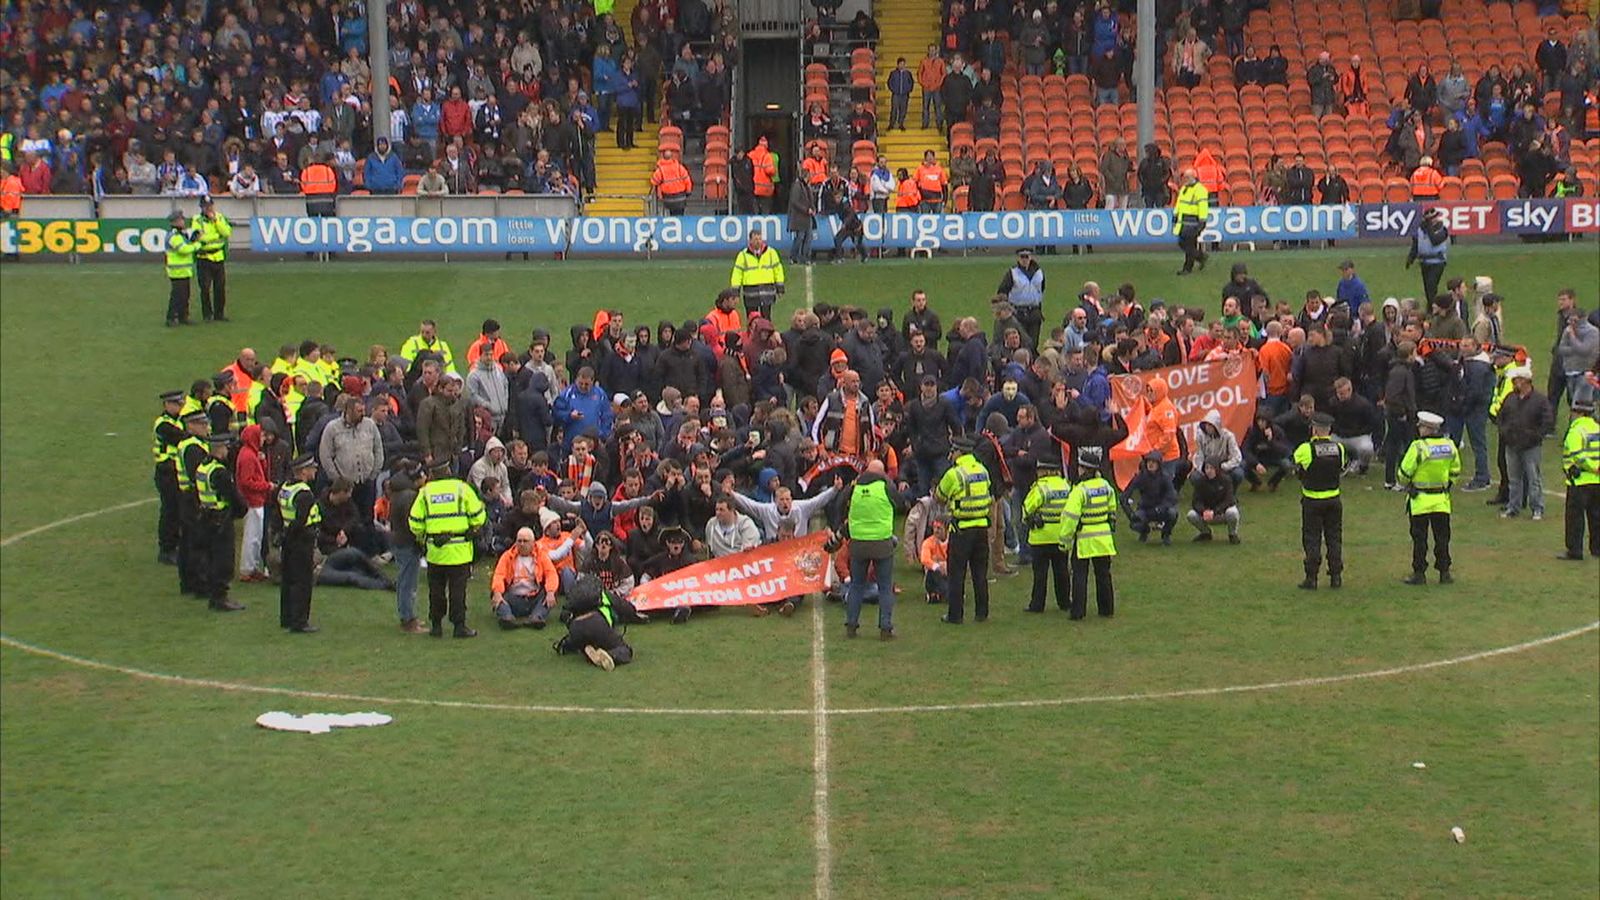 Blackpool match with Huddersfield abandoned after protest | Football